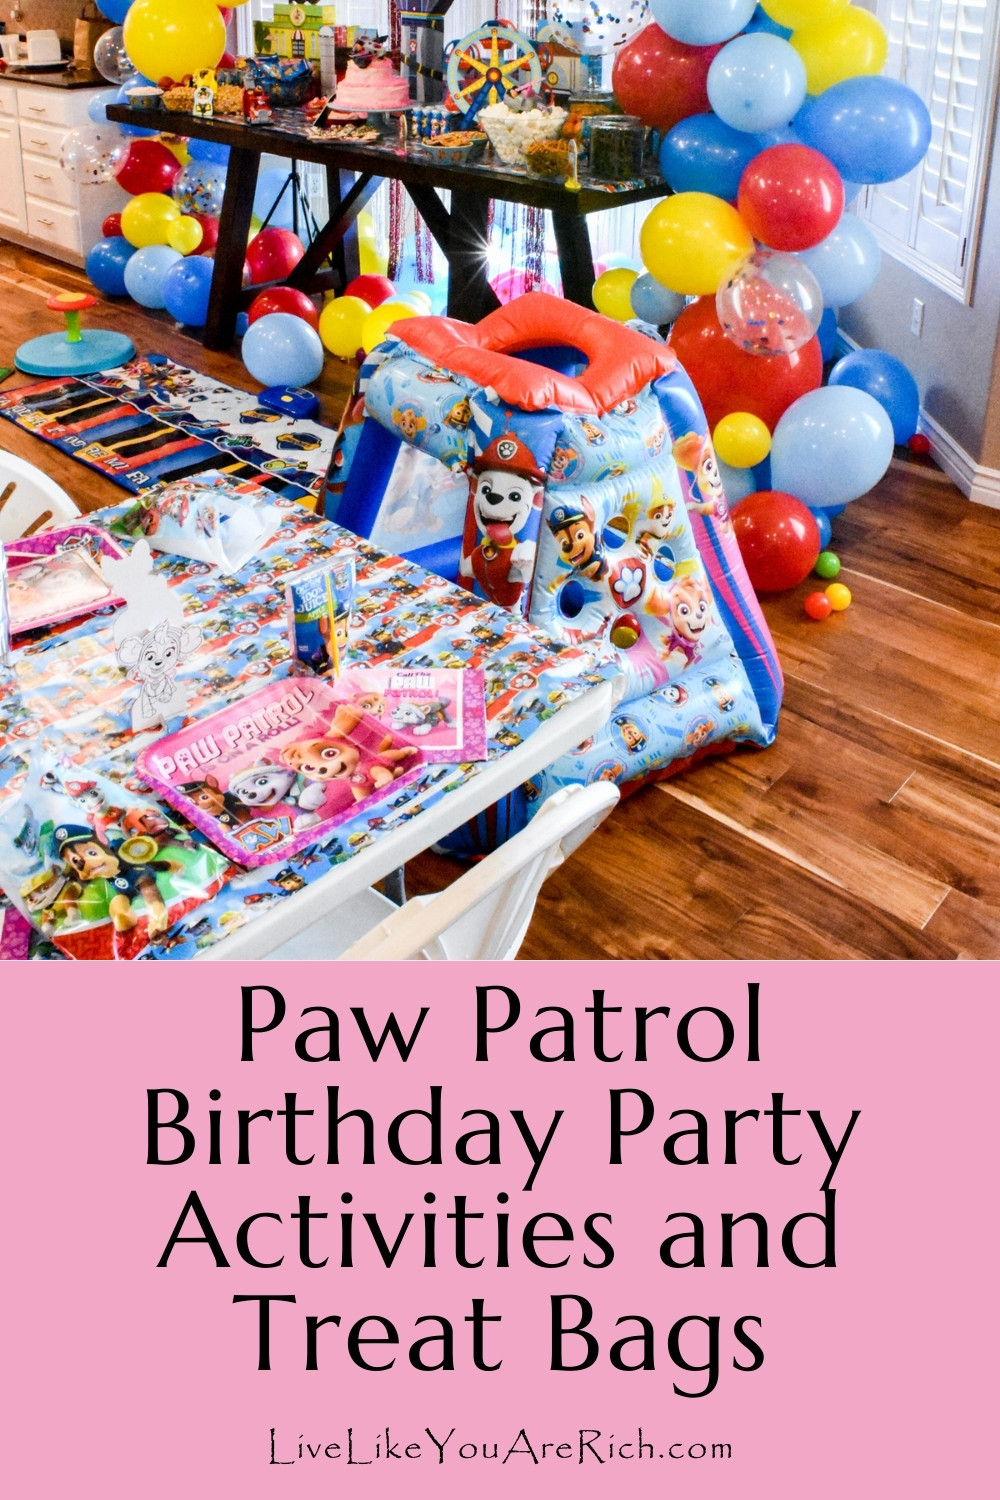 Paw Patrol Birthday Party Activities and Treat Bags